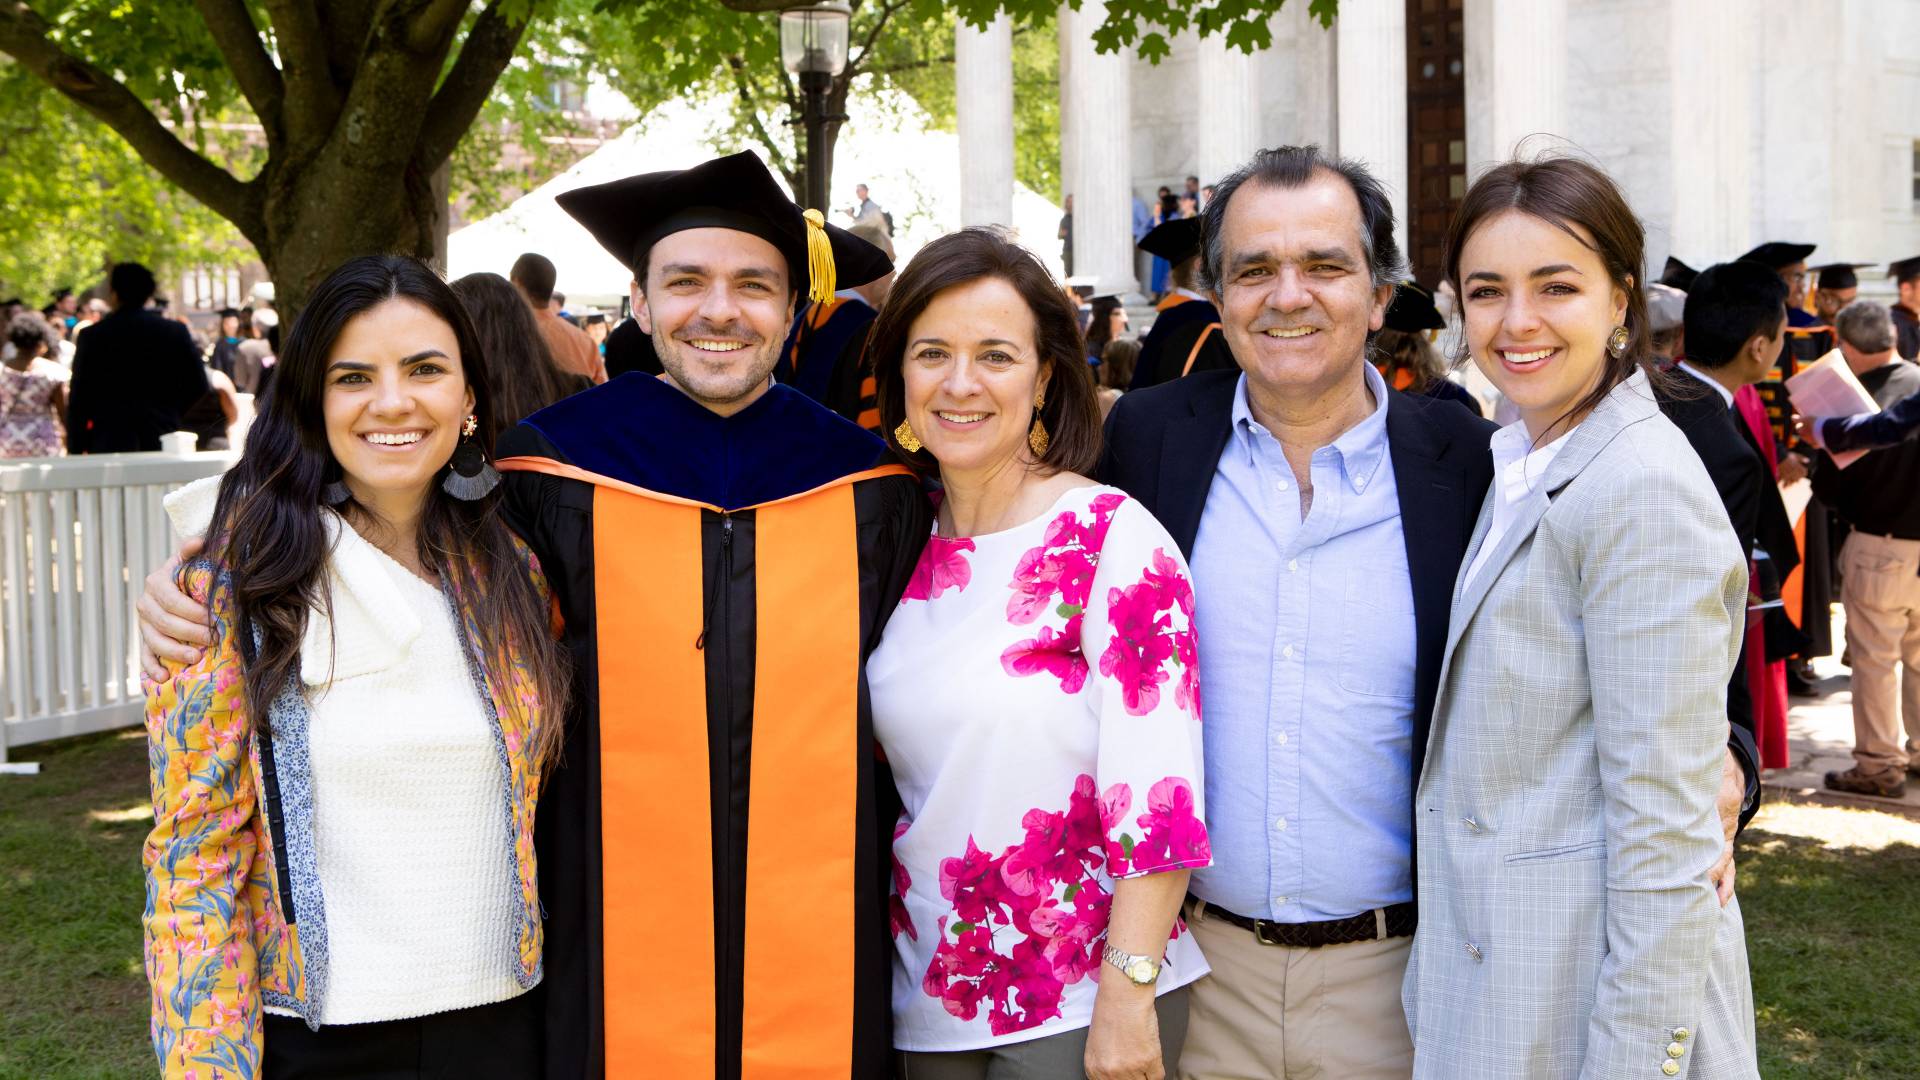 David Zuluaga Martinez with his family after the Commencement ceremony